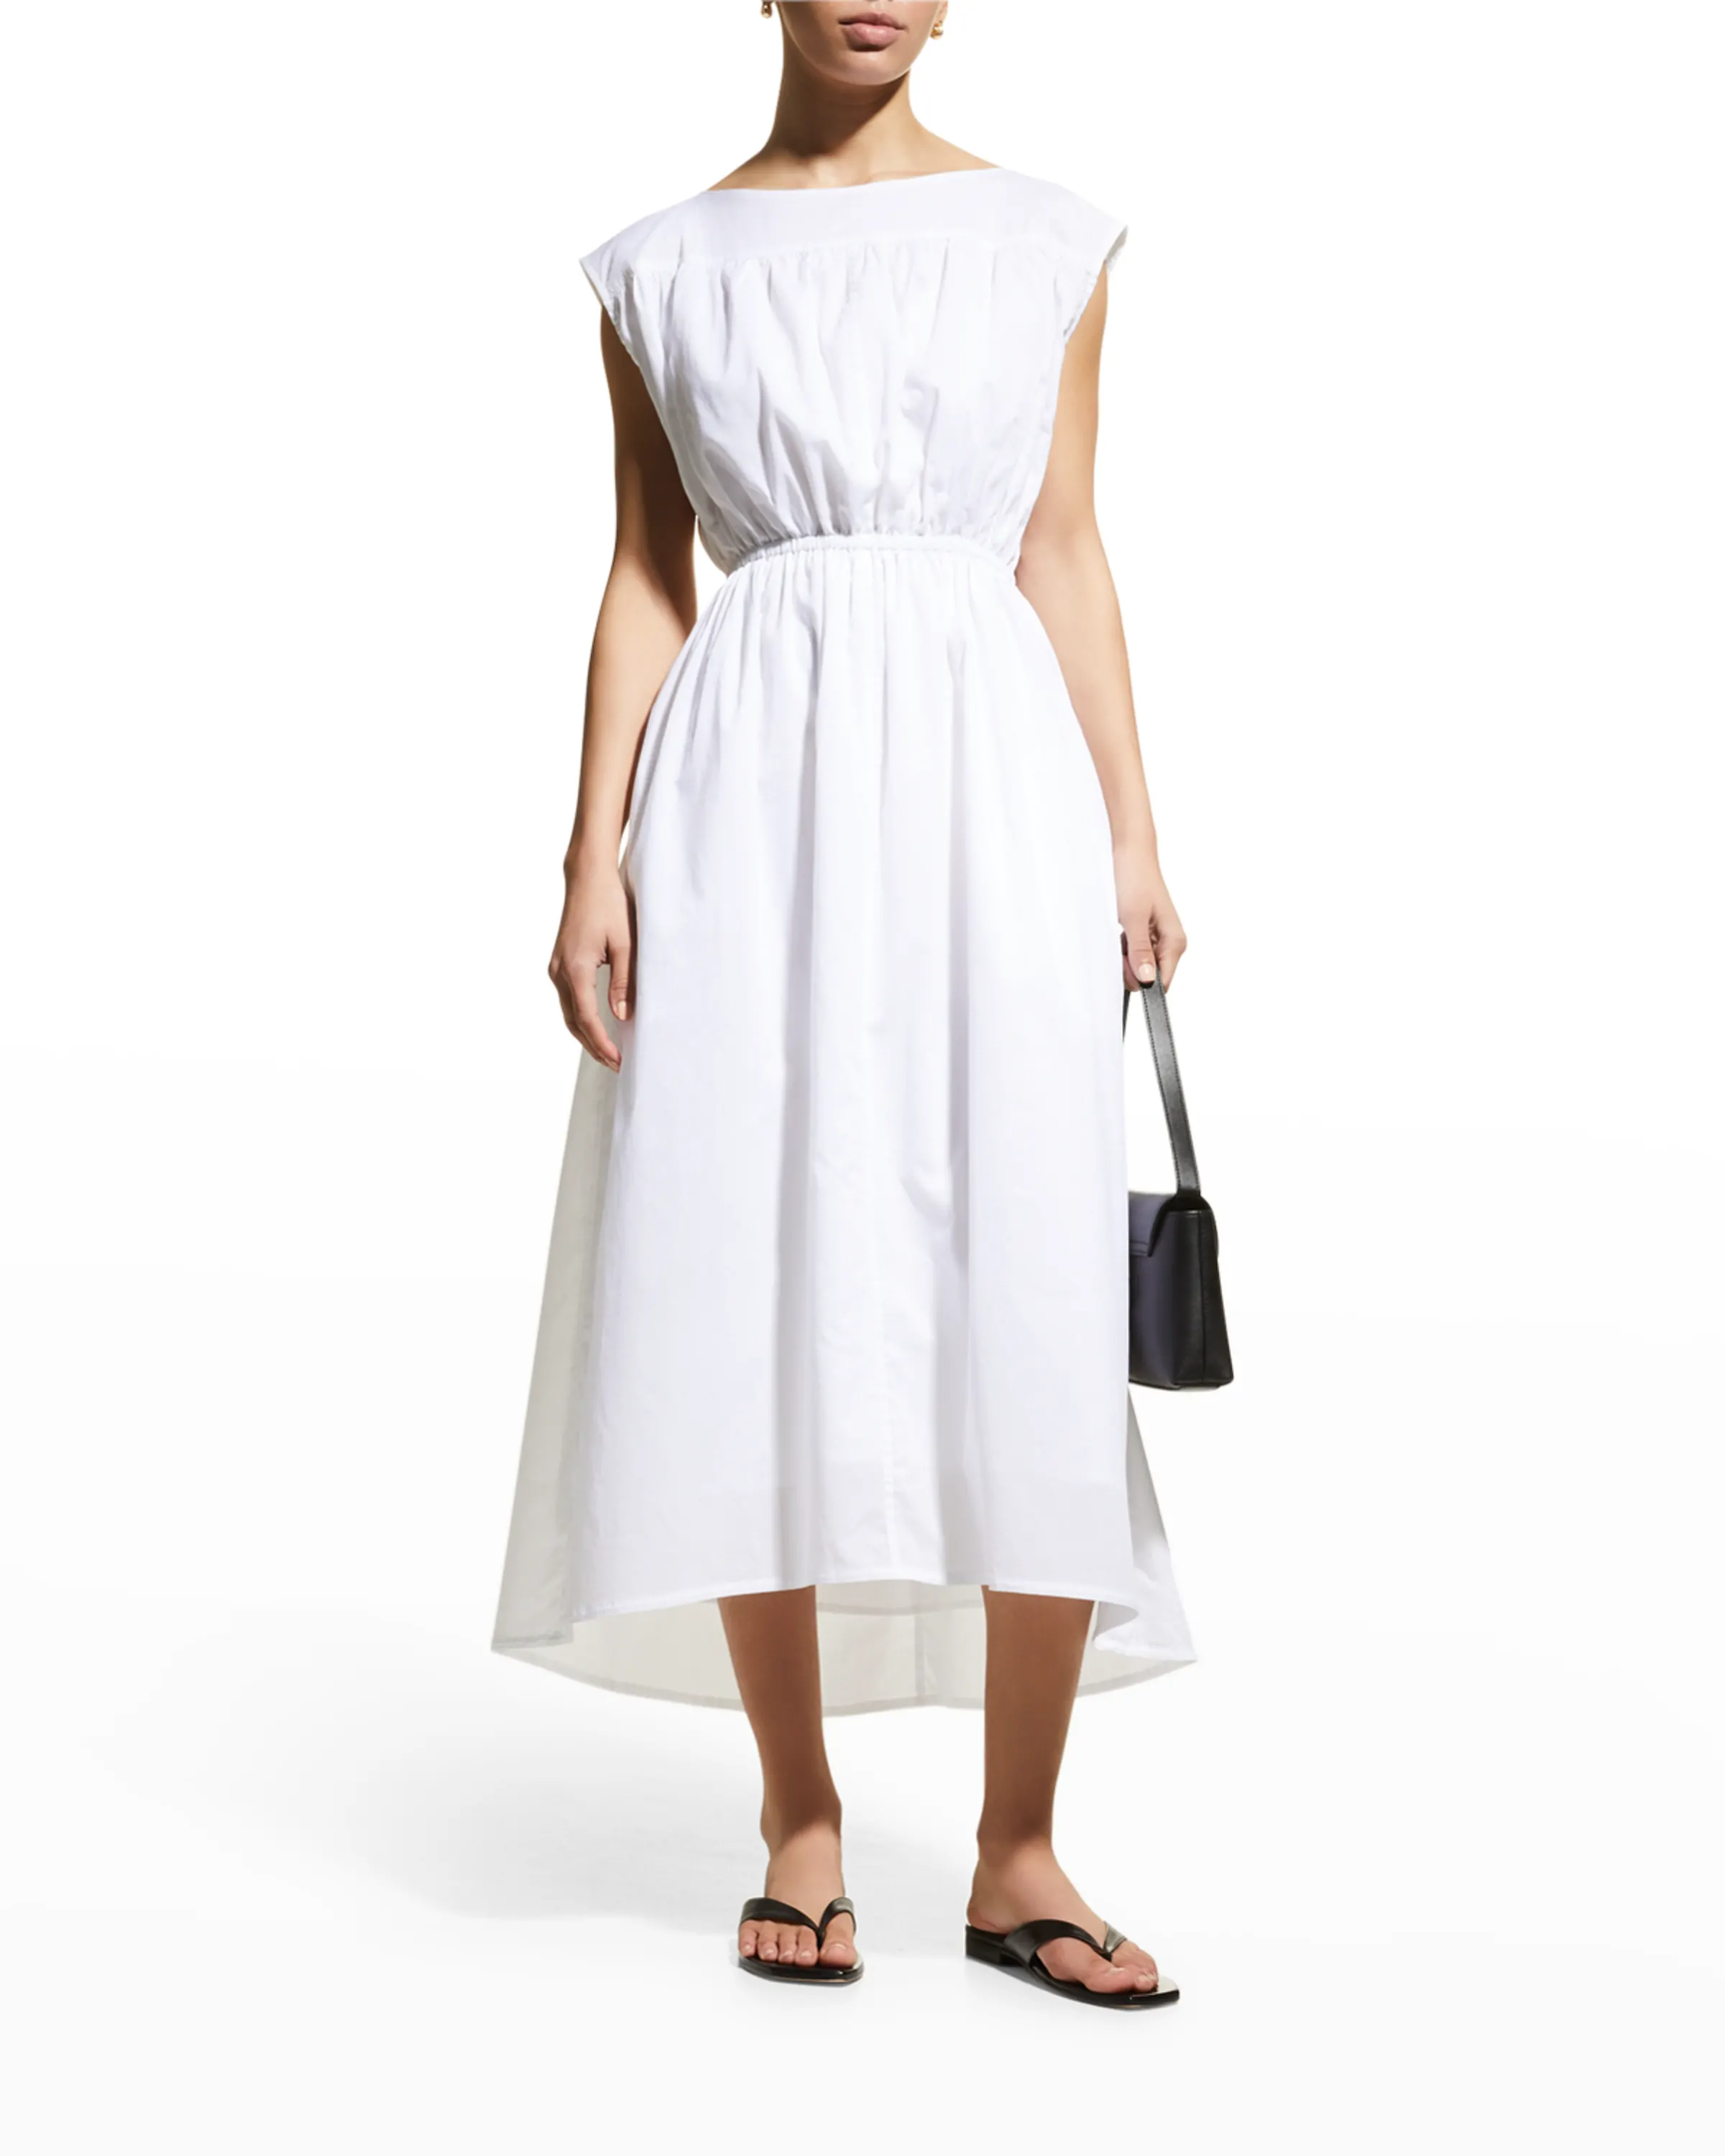 Toteme + Boat-Neck Ruched High-Low Dress